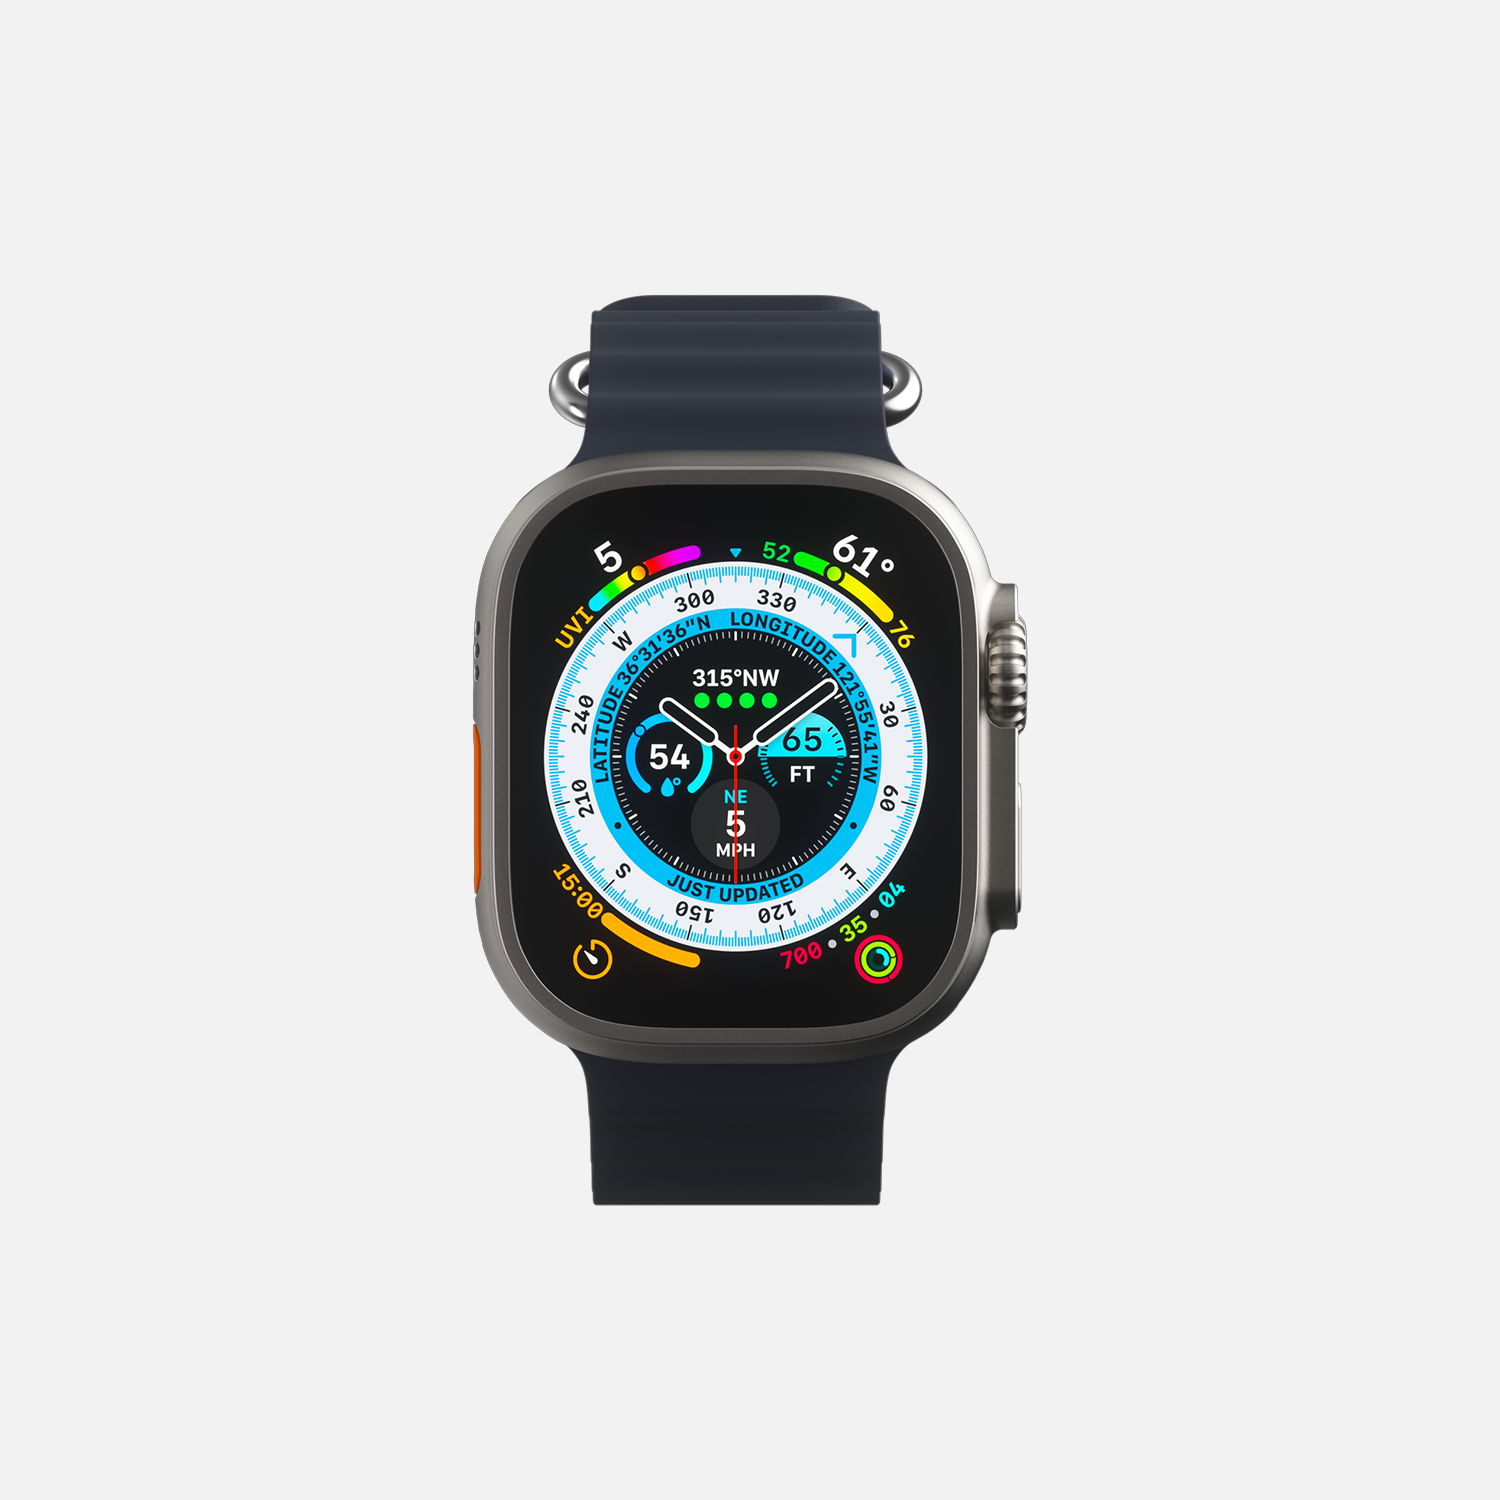 Apple Smartwatch with black sports band displaying colorful activity rings and weather data on a white background.